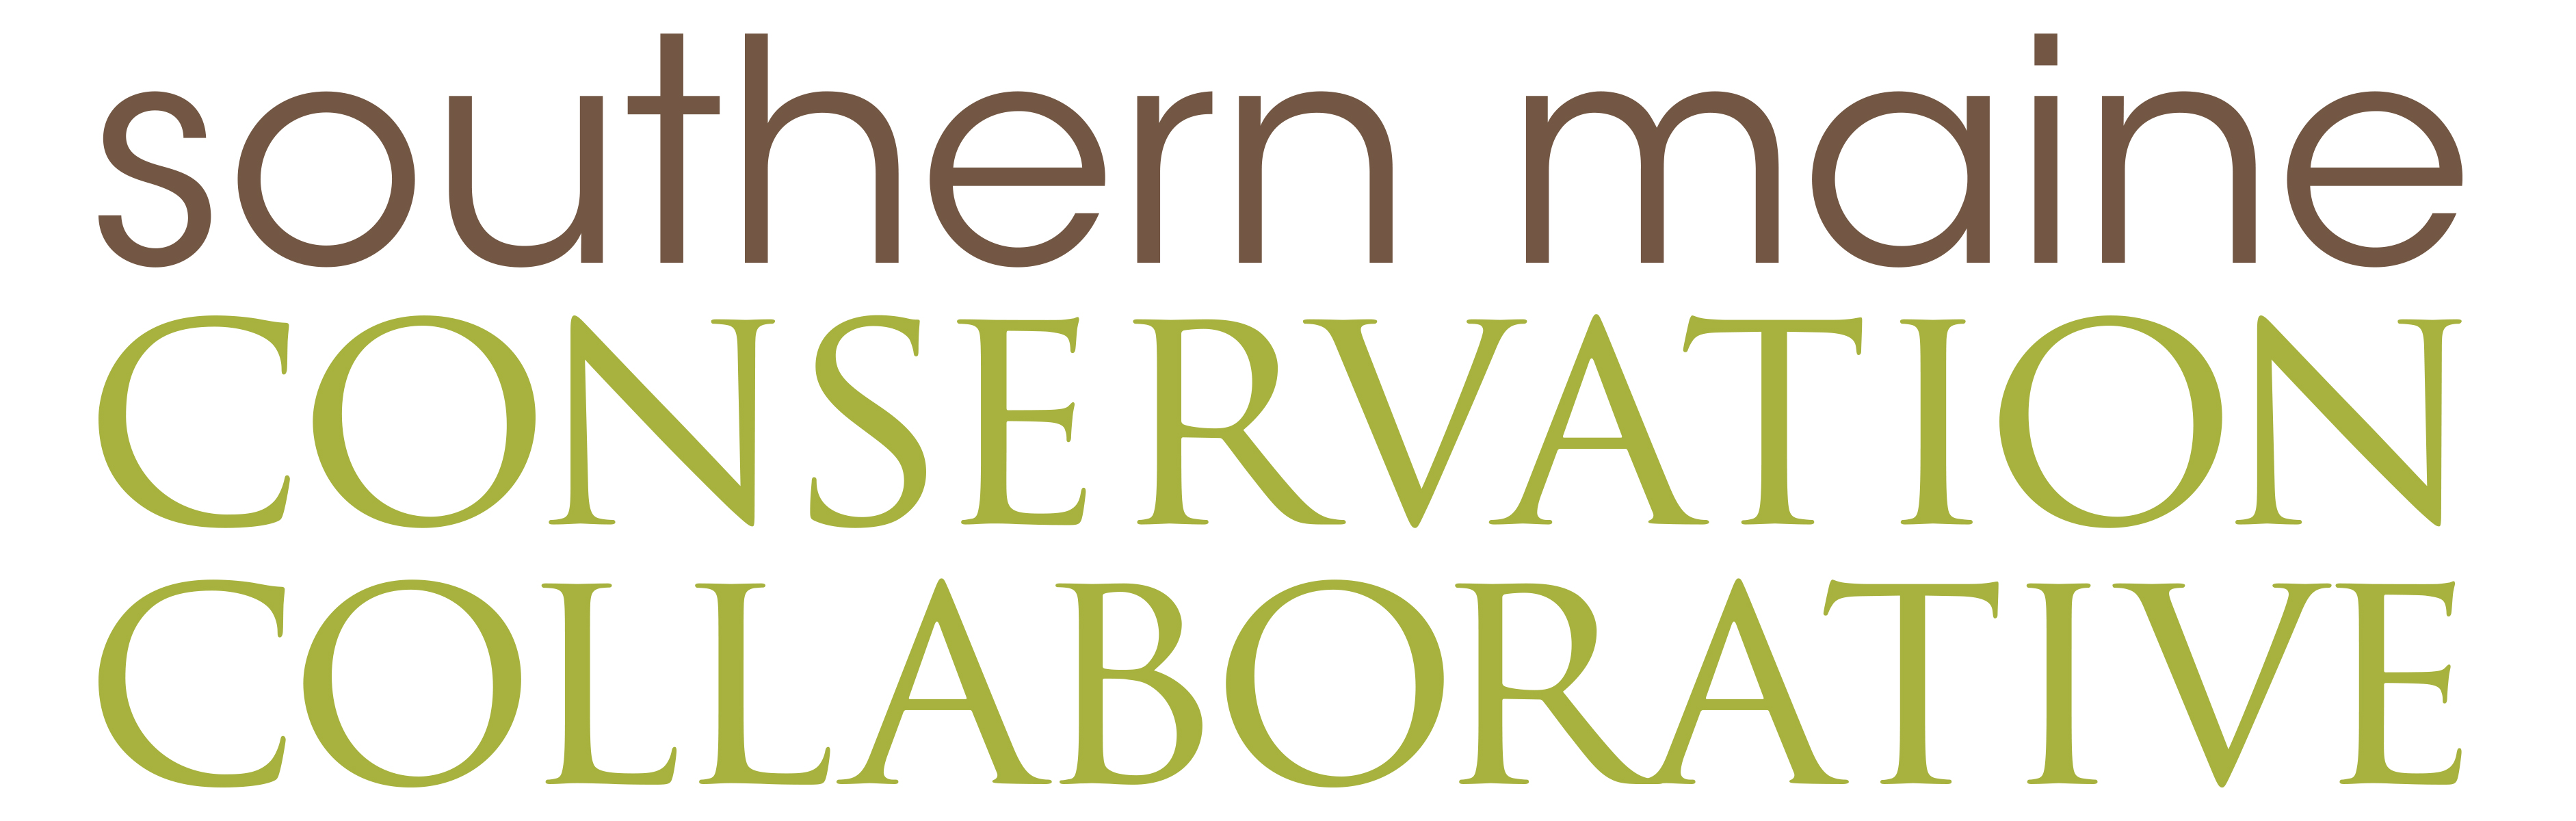 Southern Maine Conservation Collaborative logo